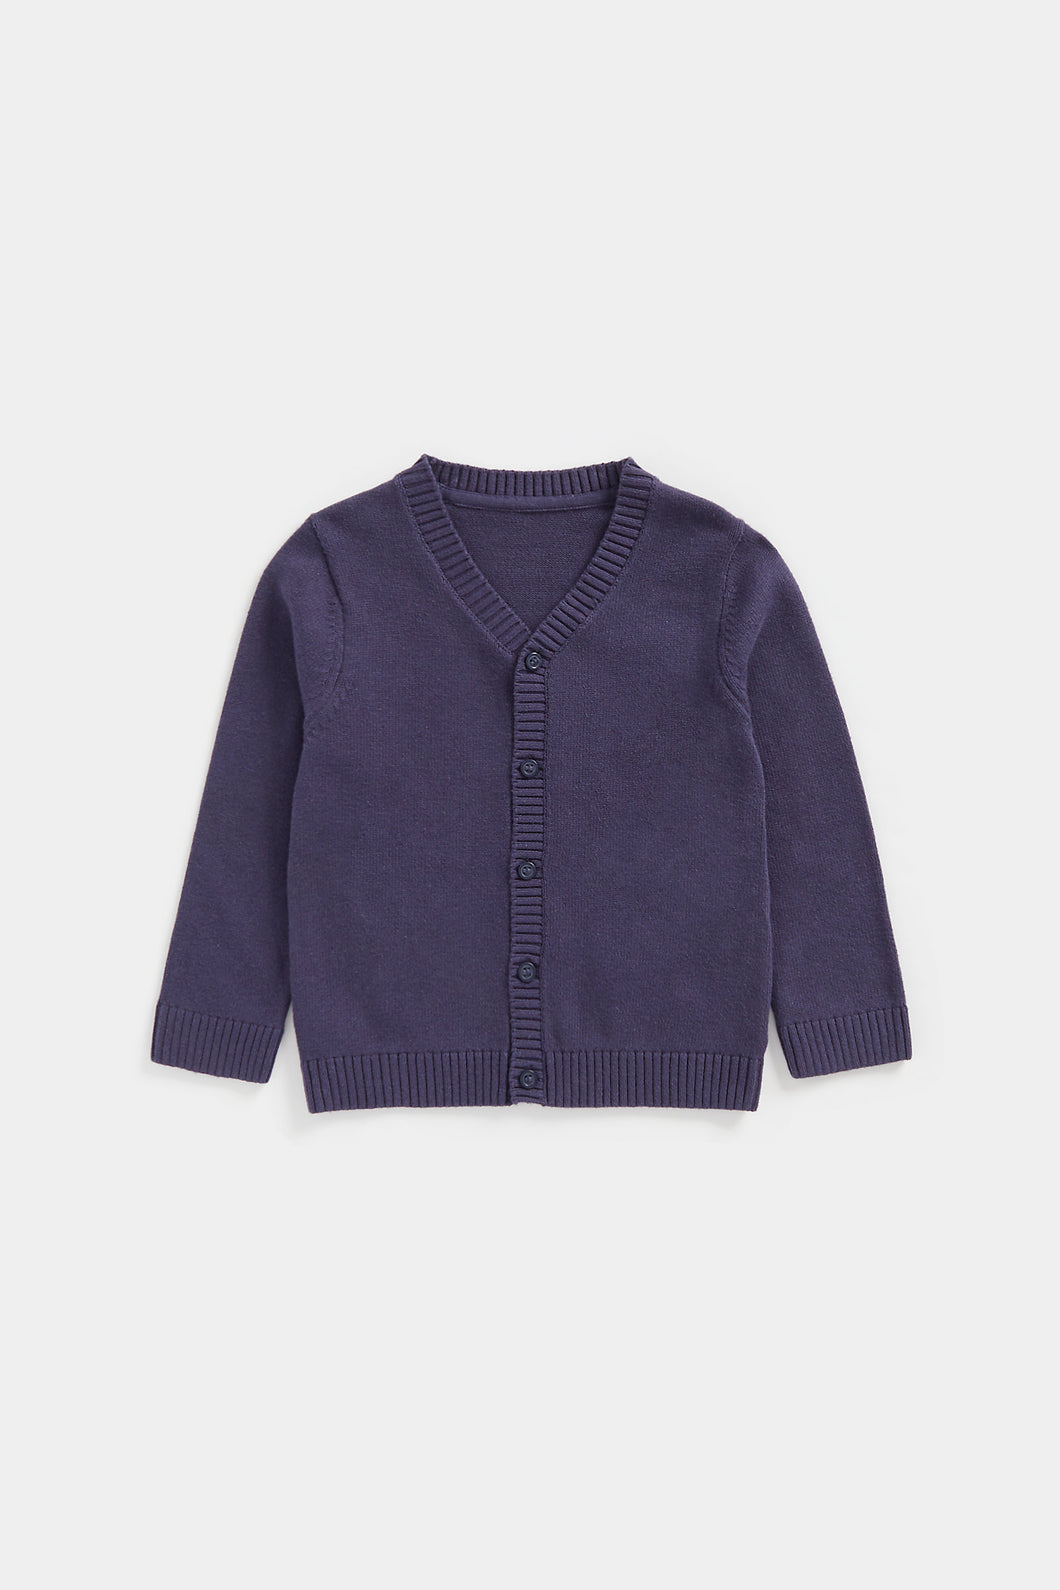 Mothercare Navy Knitted Cardigan